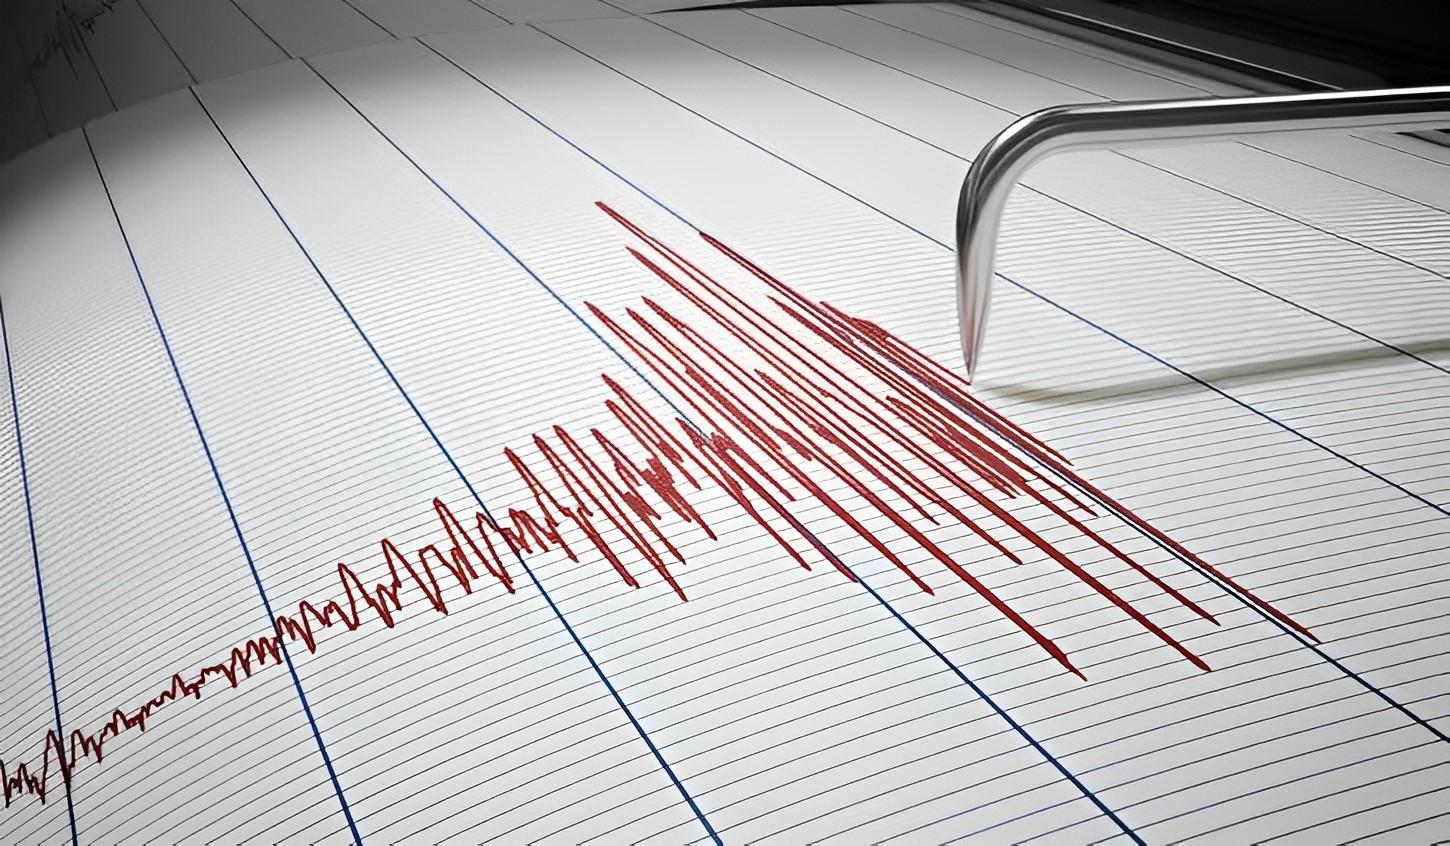 Gujarat's Kutch was rocked by an earthquake measuring 4.5 on the Richter scale